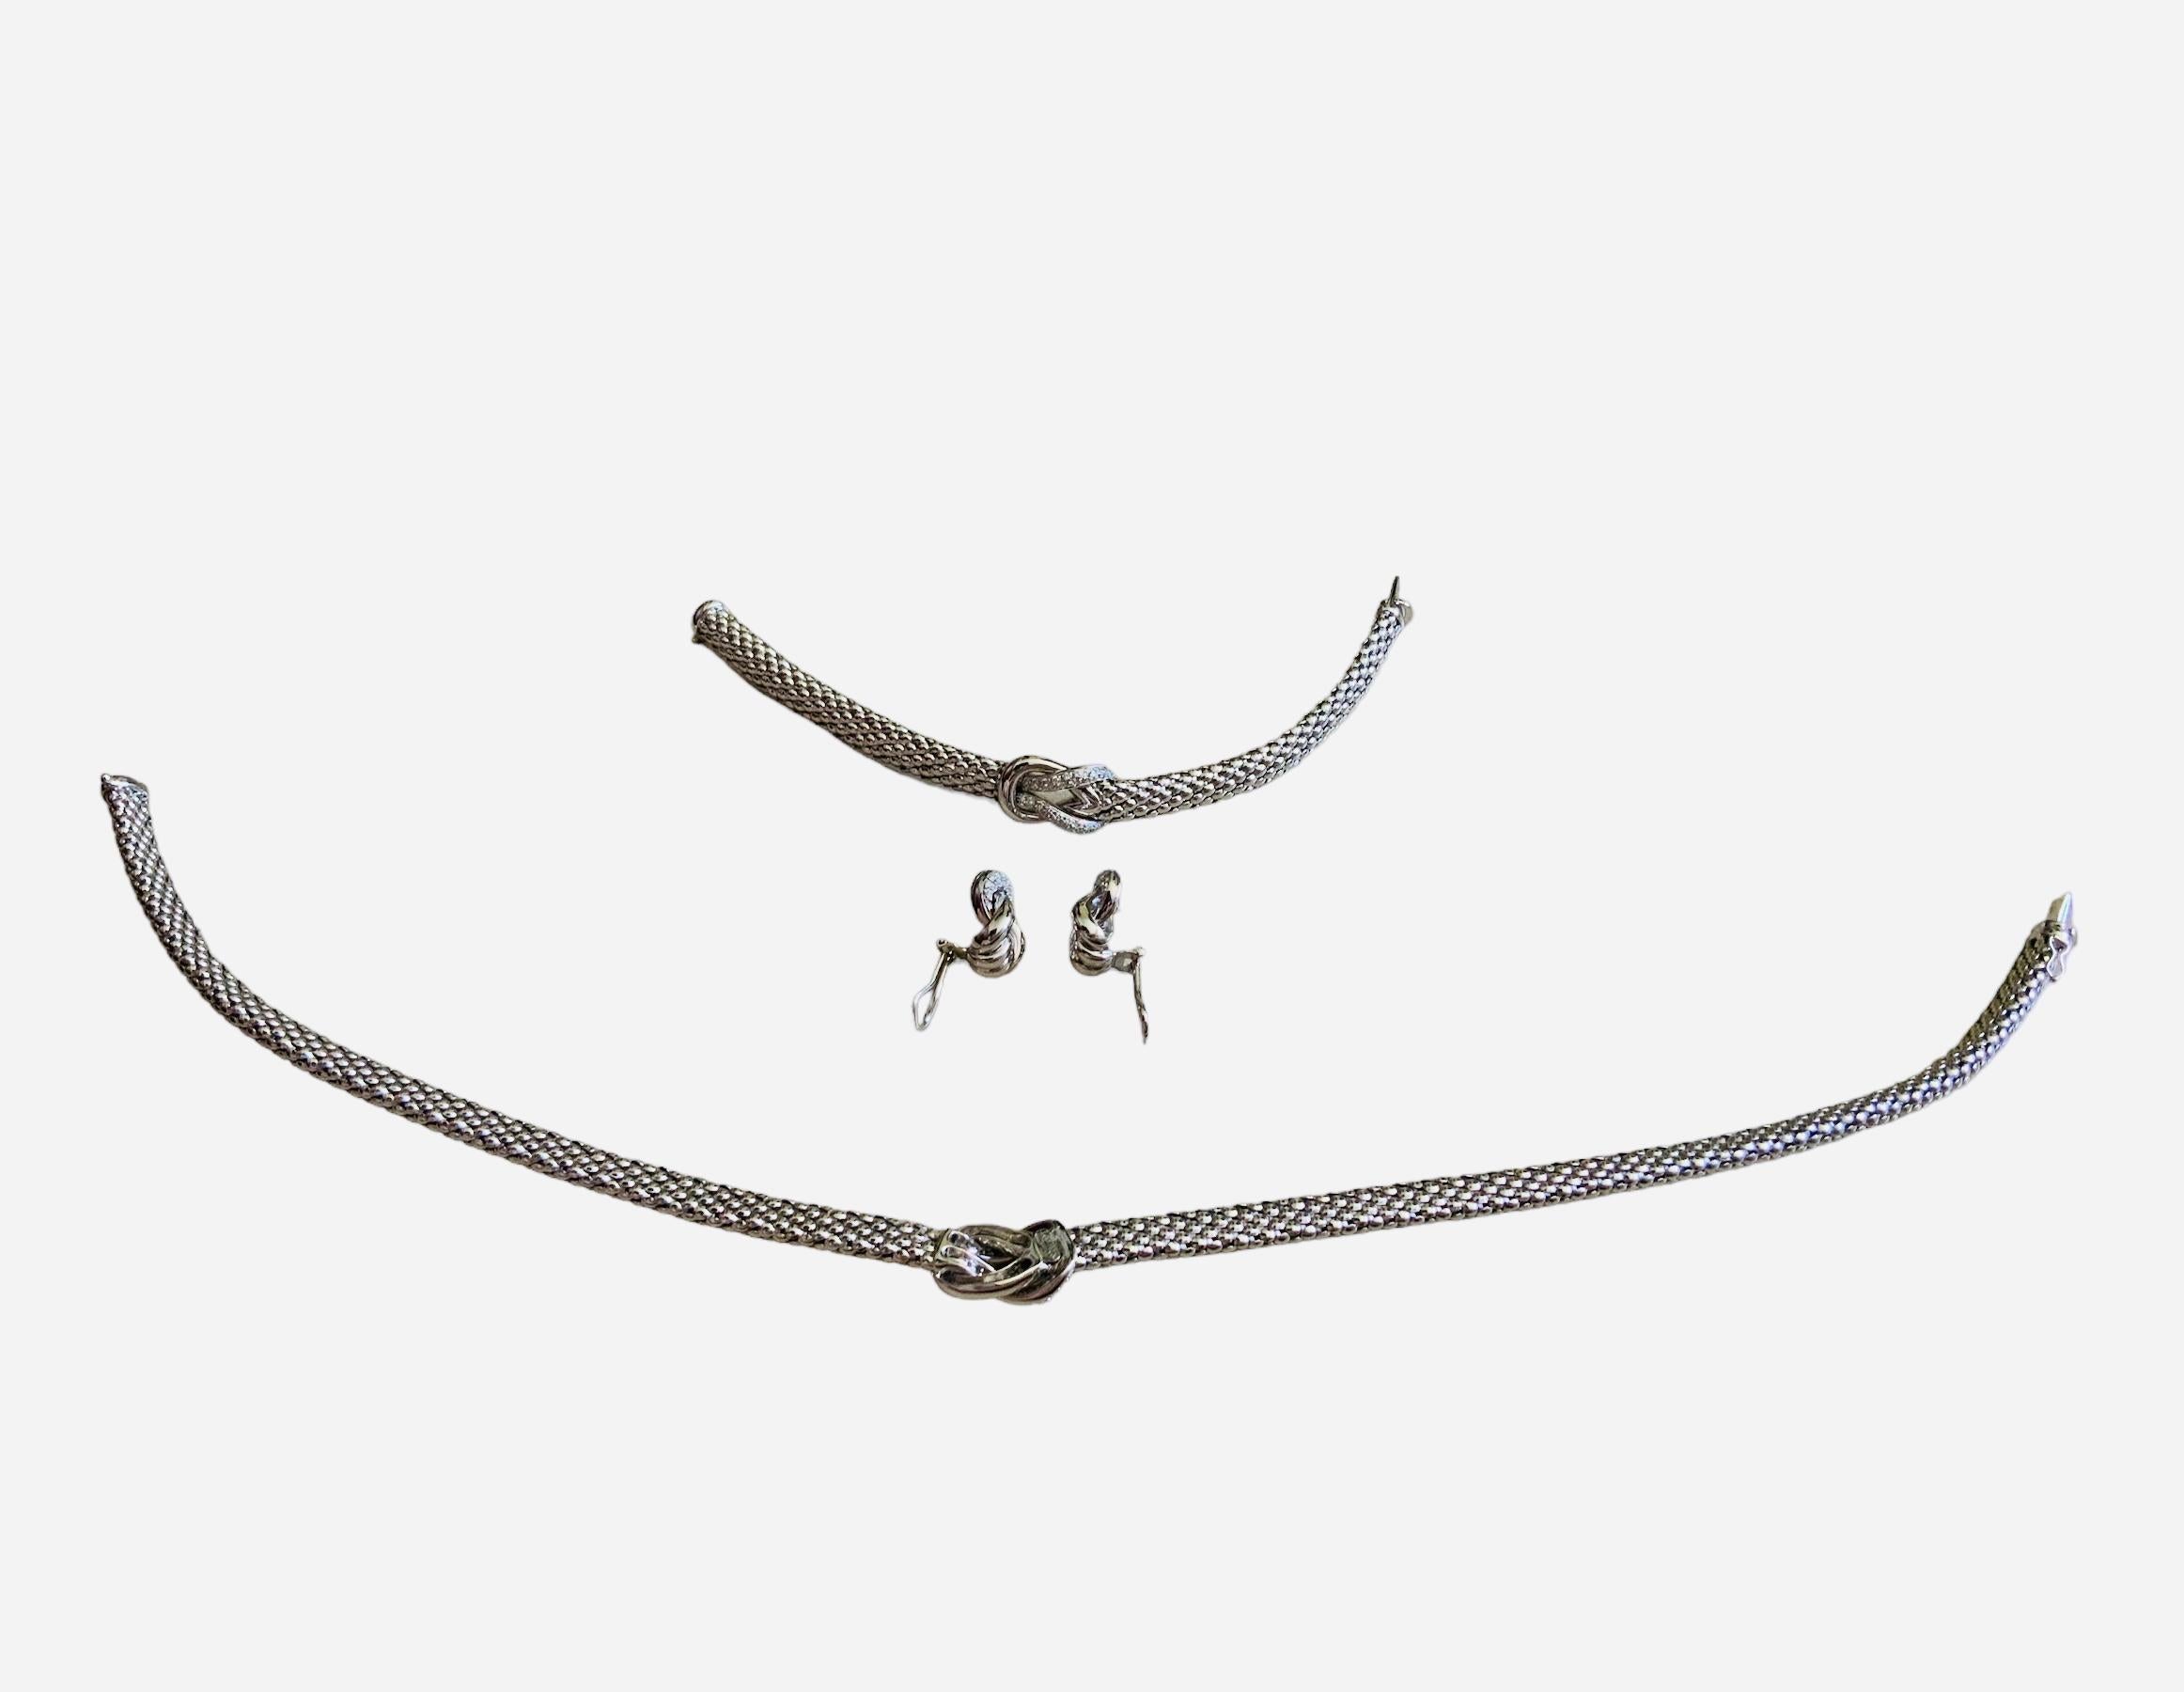 This is a Leo Pizzo set of 18K ( 750) white gold and diamonds bracelet, a pair of earrings and a necklace. Both the bracelet ( L= 7.75 in ) and necklace ( L= 16.5in  ) depict a snake like belts joined in the center by an Hercules, double or love